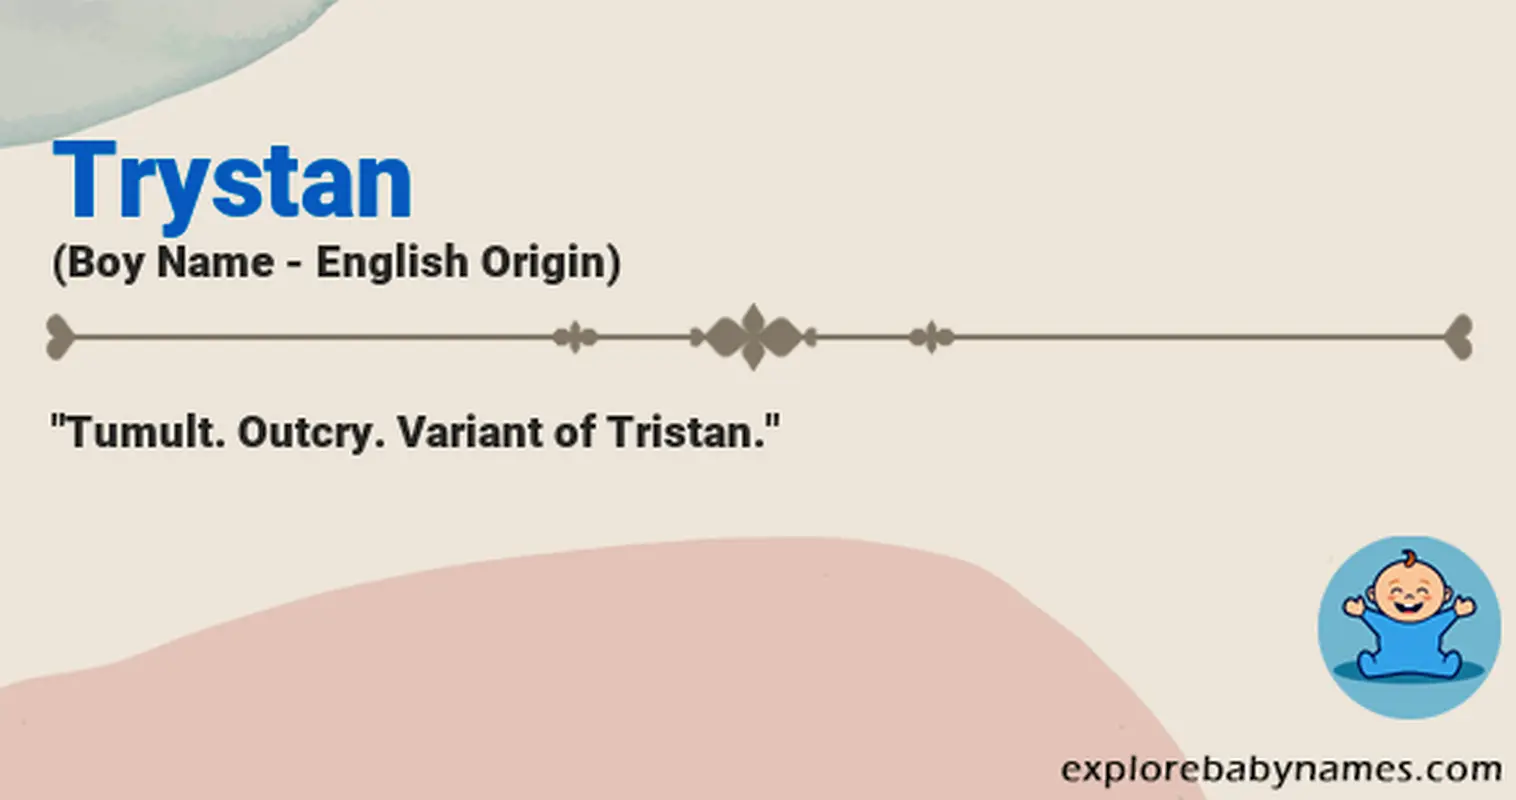 Meaning of Trystan